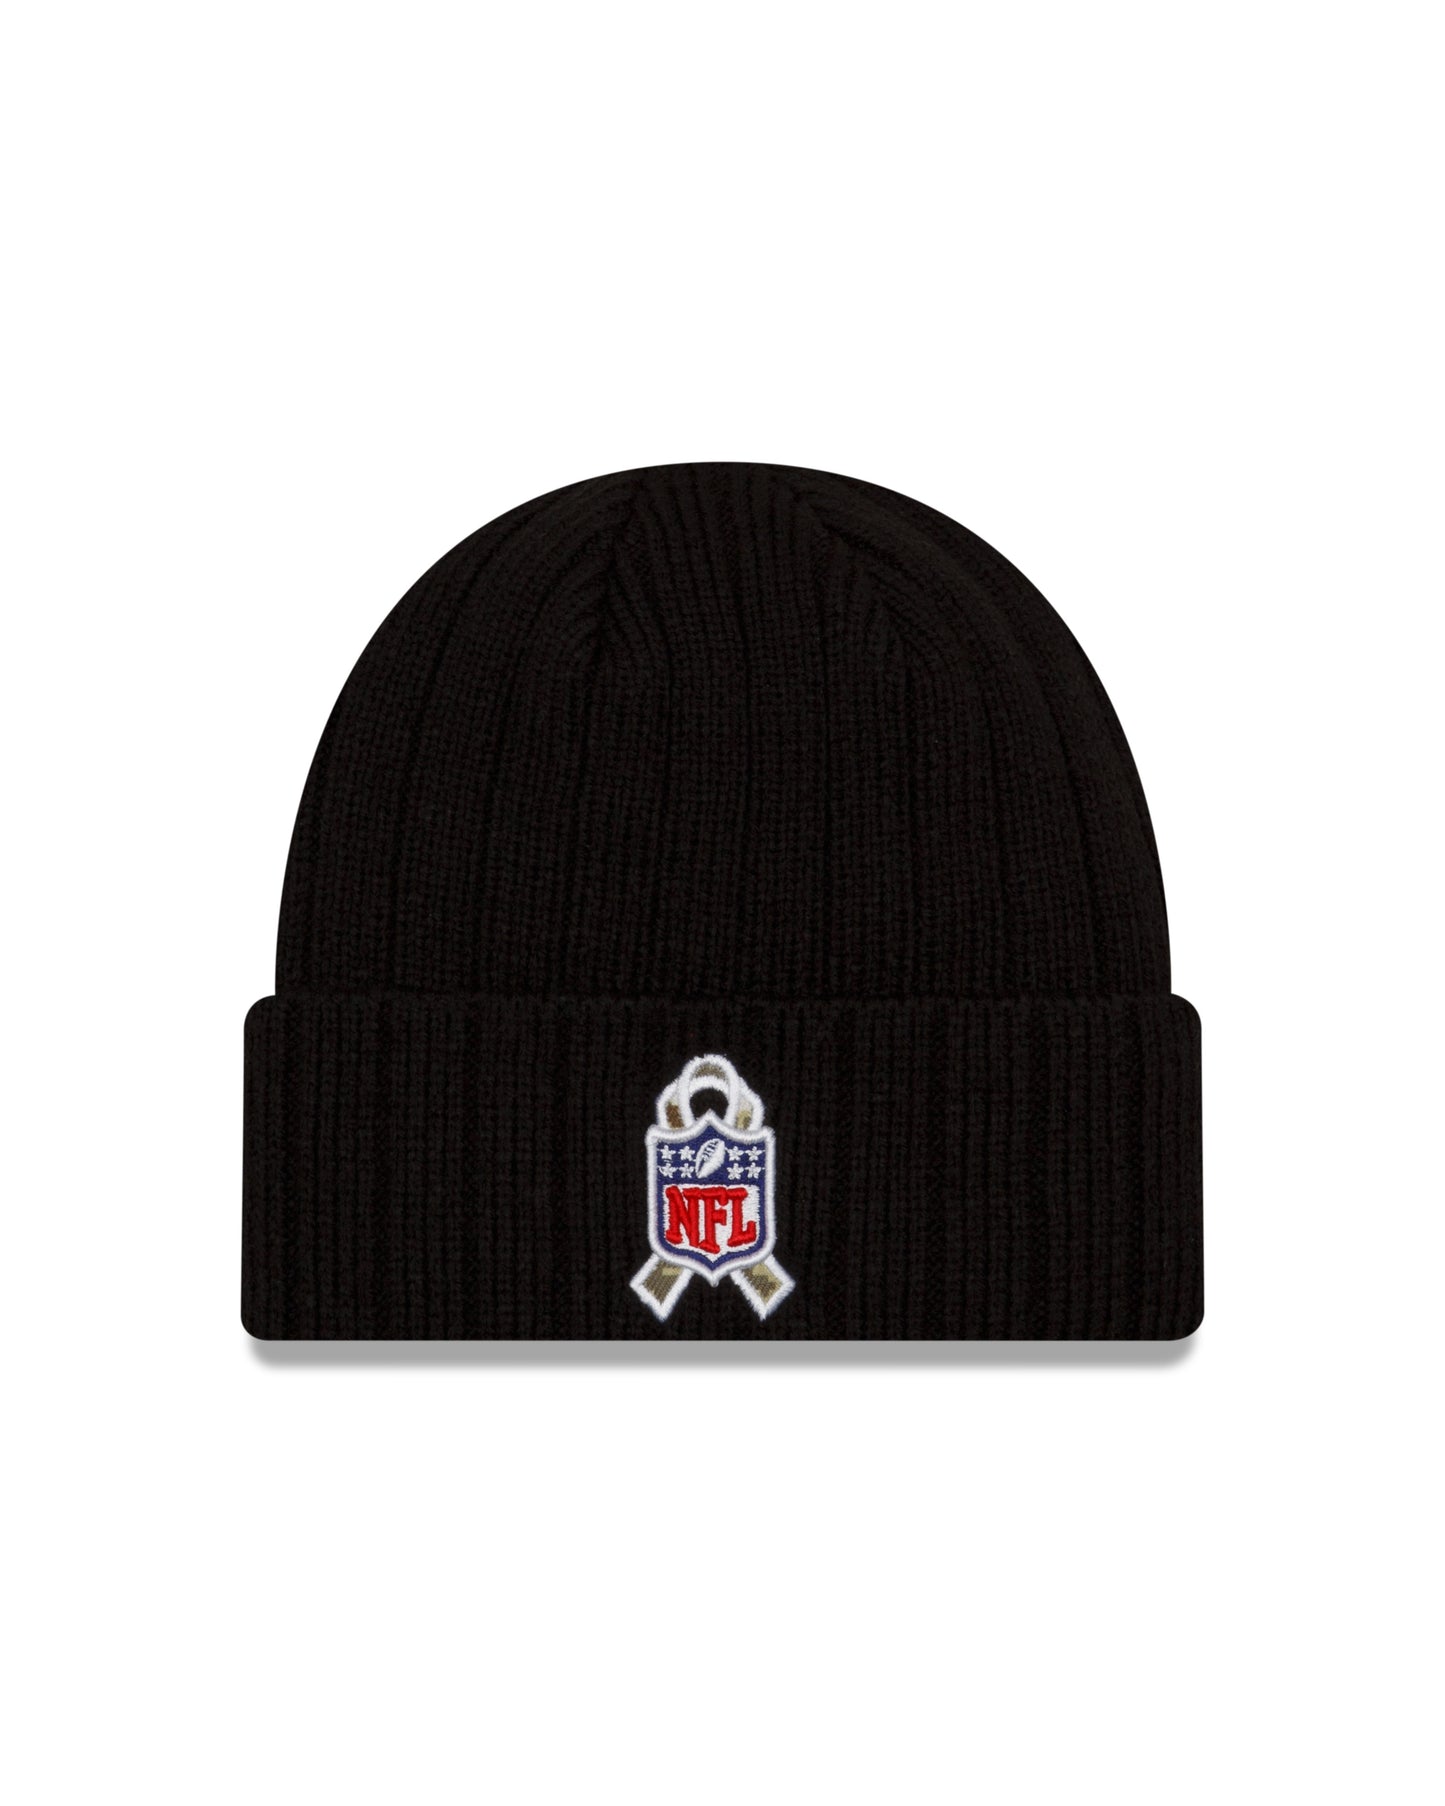 Tampa Bay Buccaneers New Era Salute to Service Sideline Knit Hat- Black